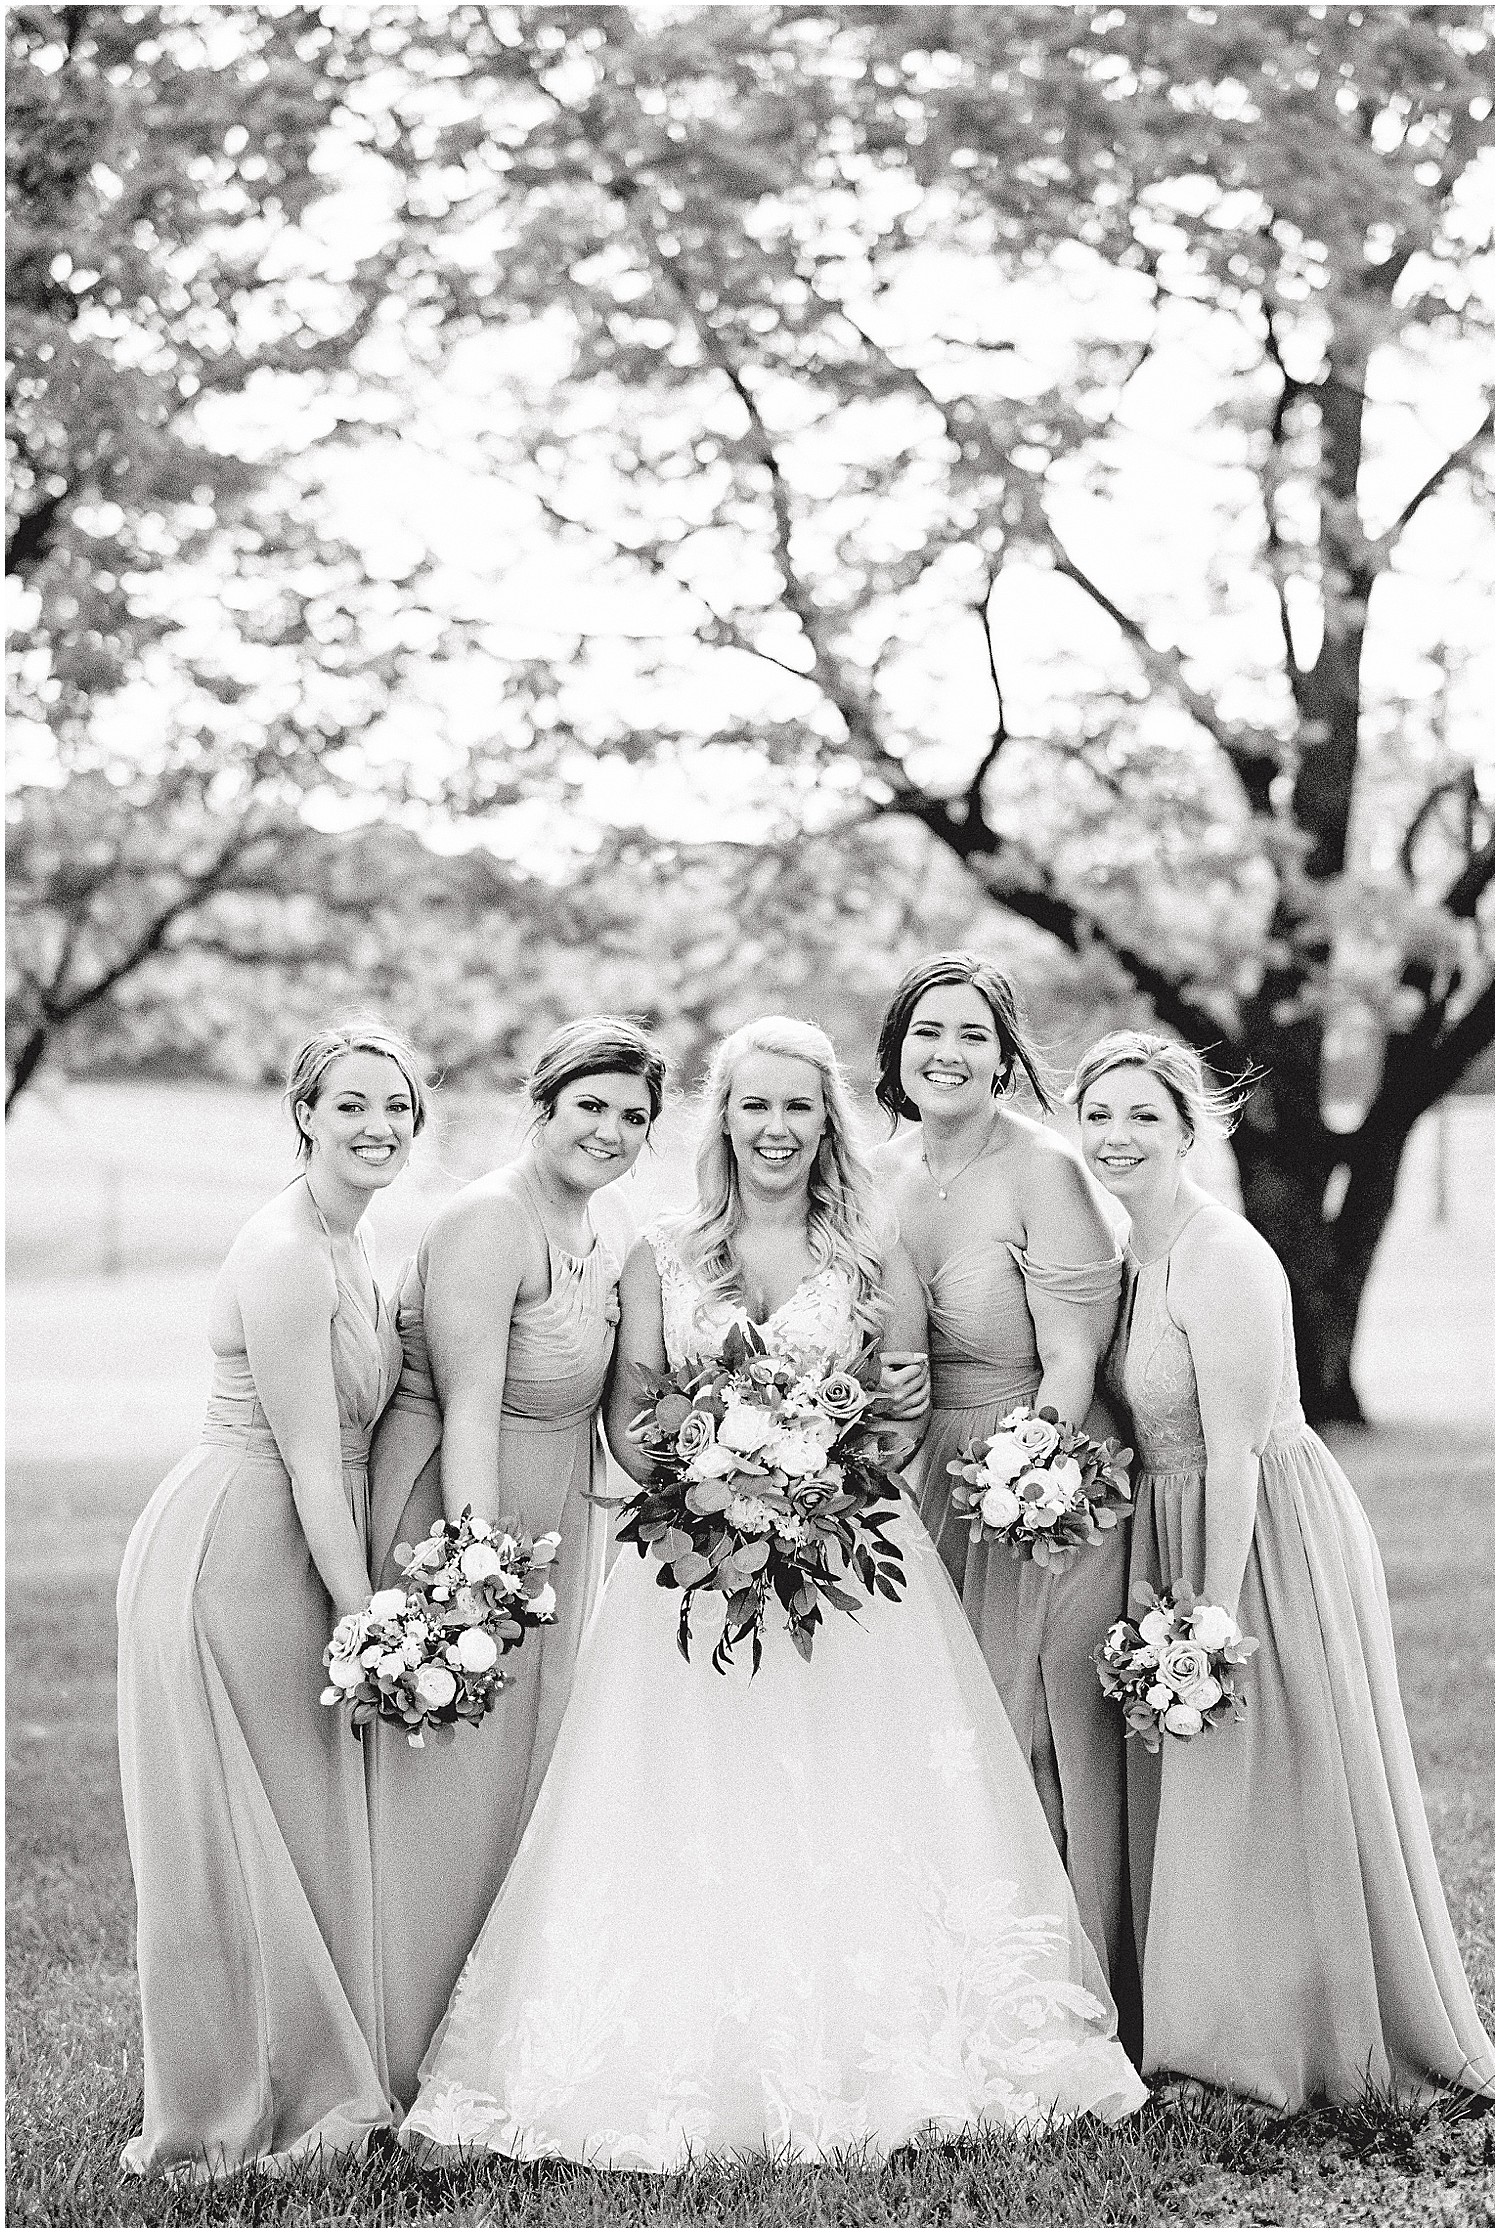 black and white image of bride standing with bridesmaids